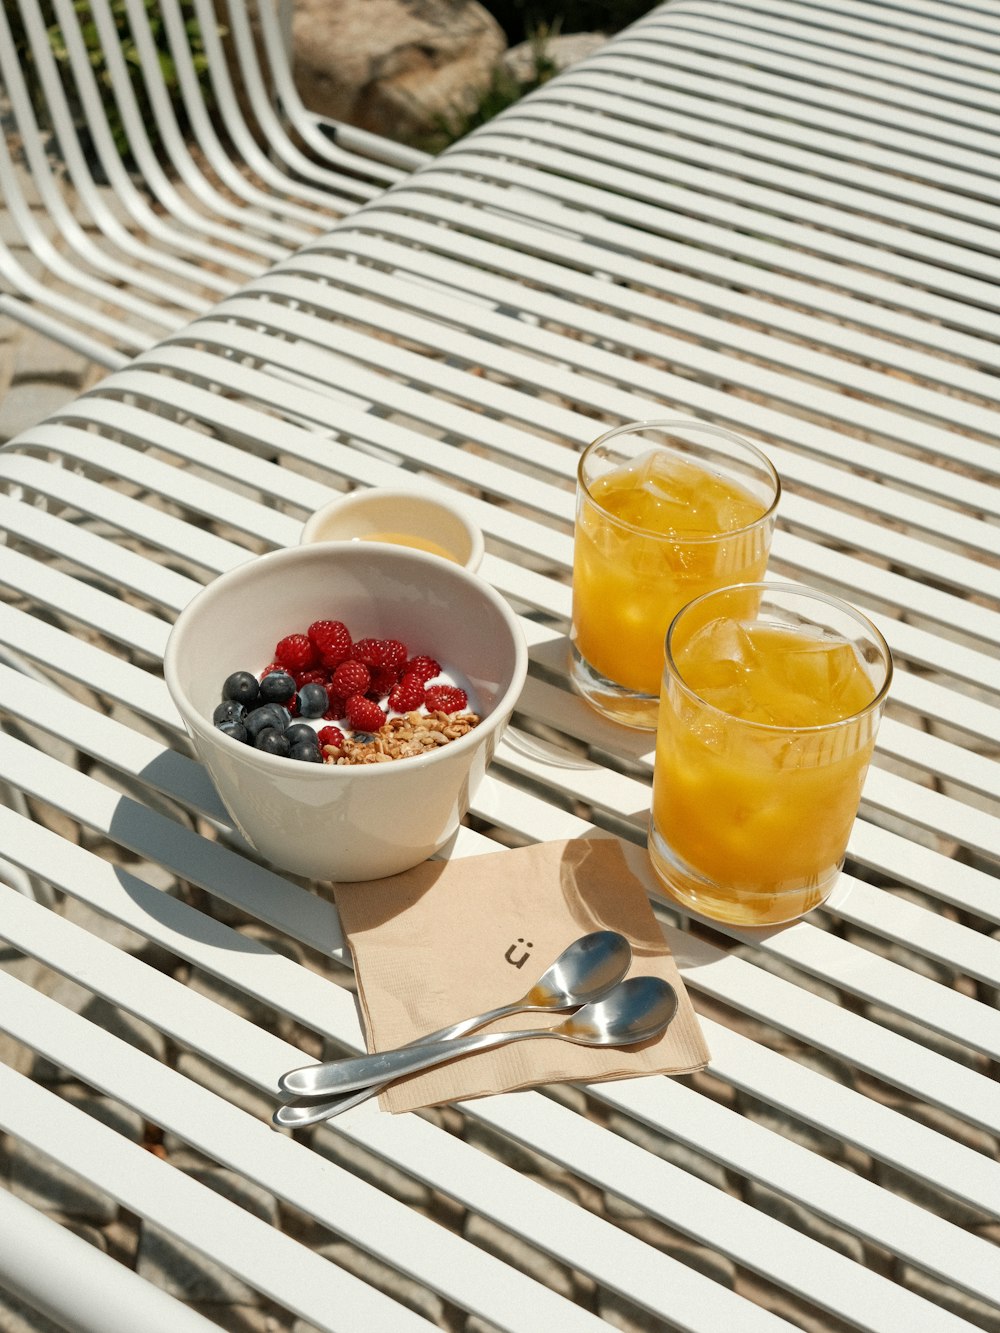 a bowl of fruit and two glasses of orange juice